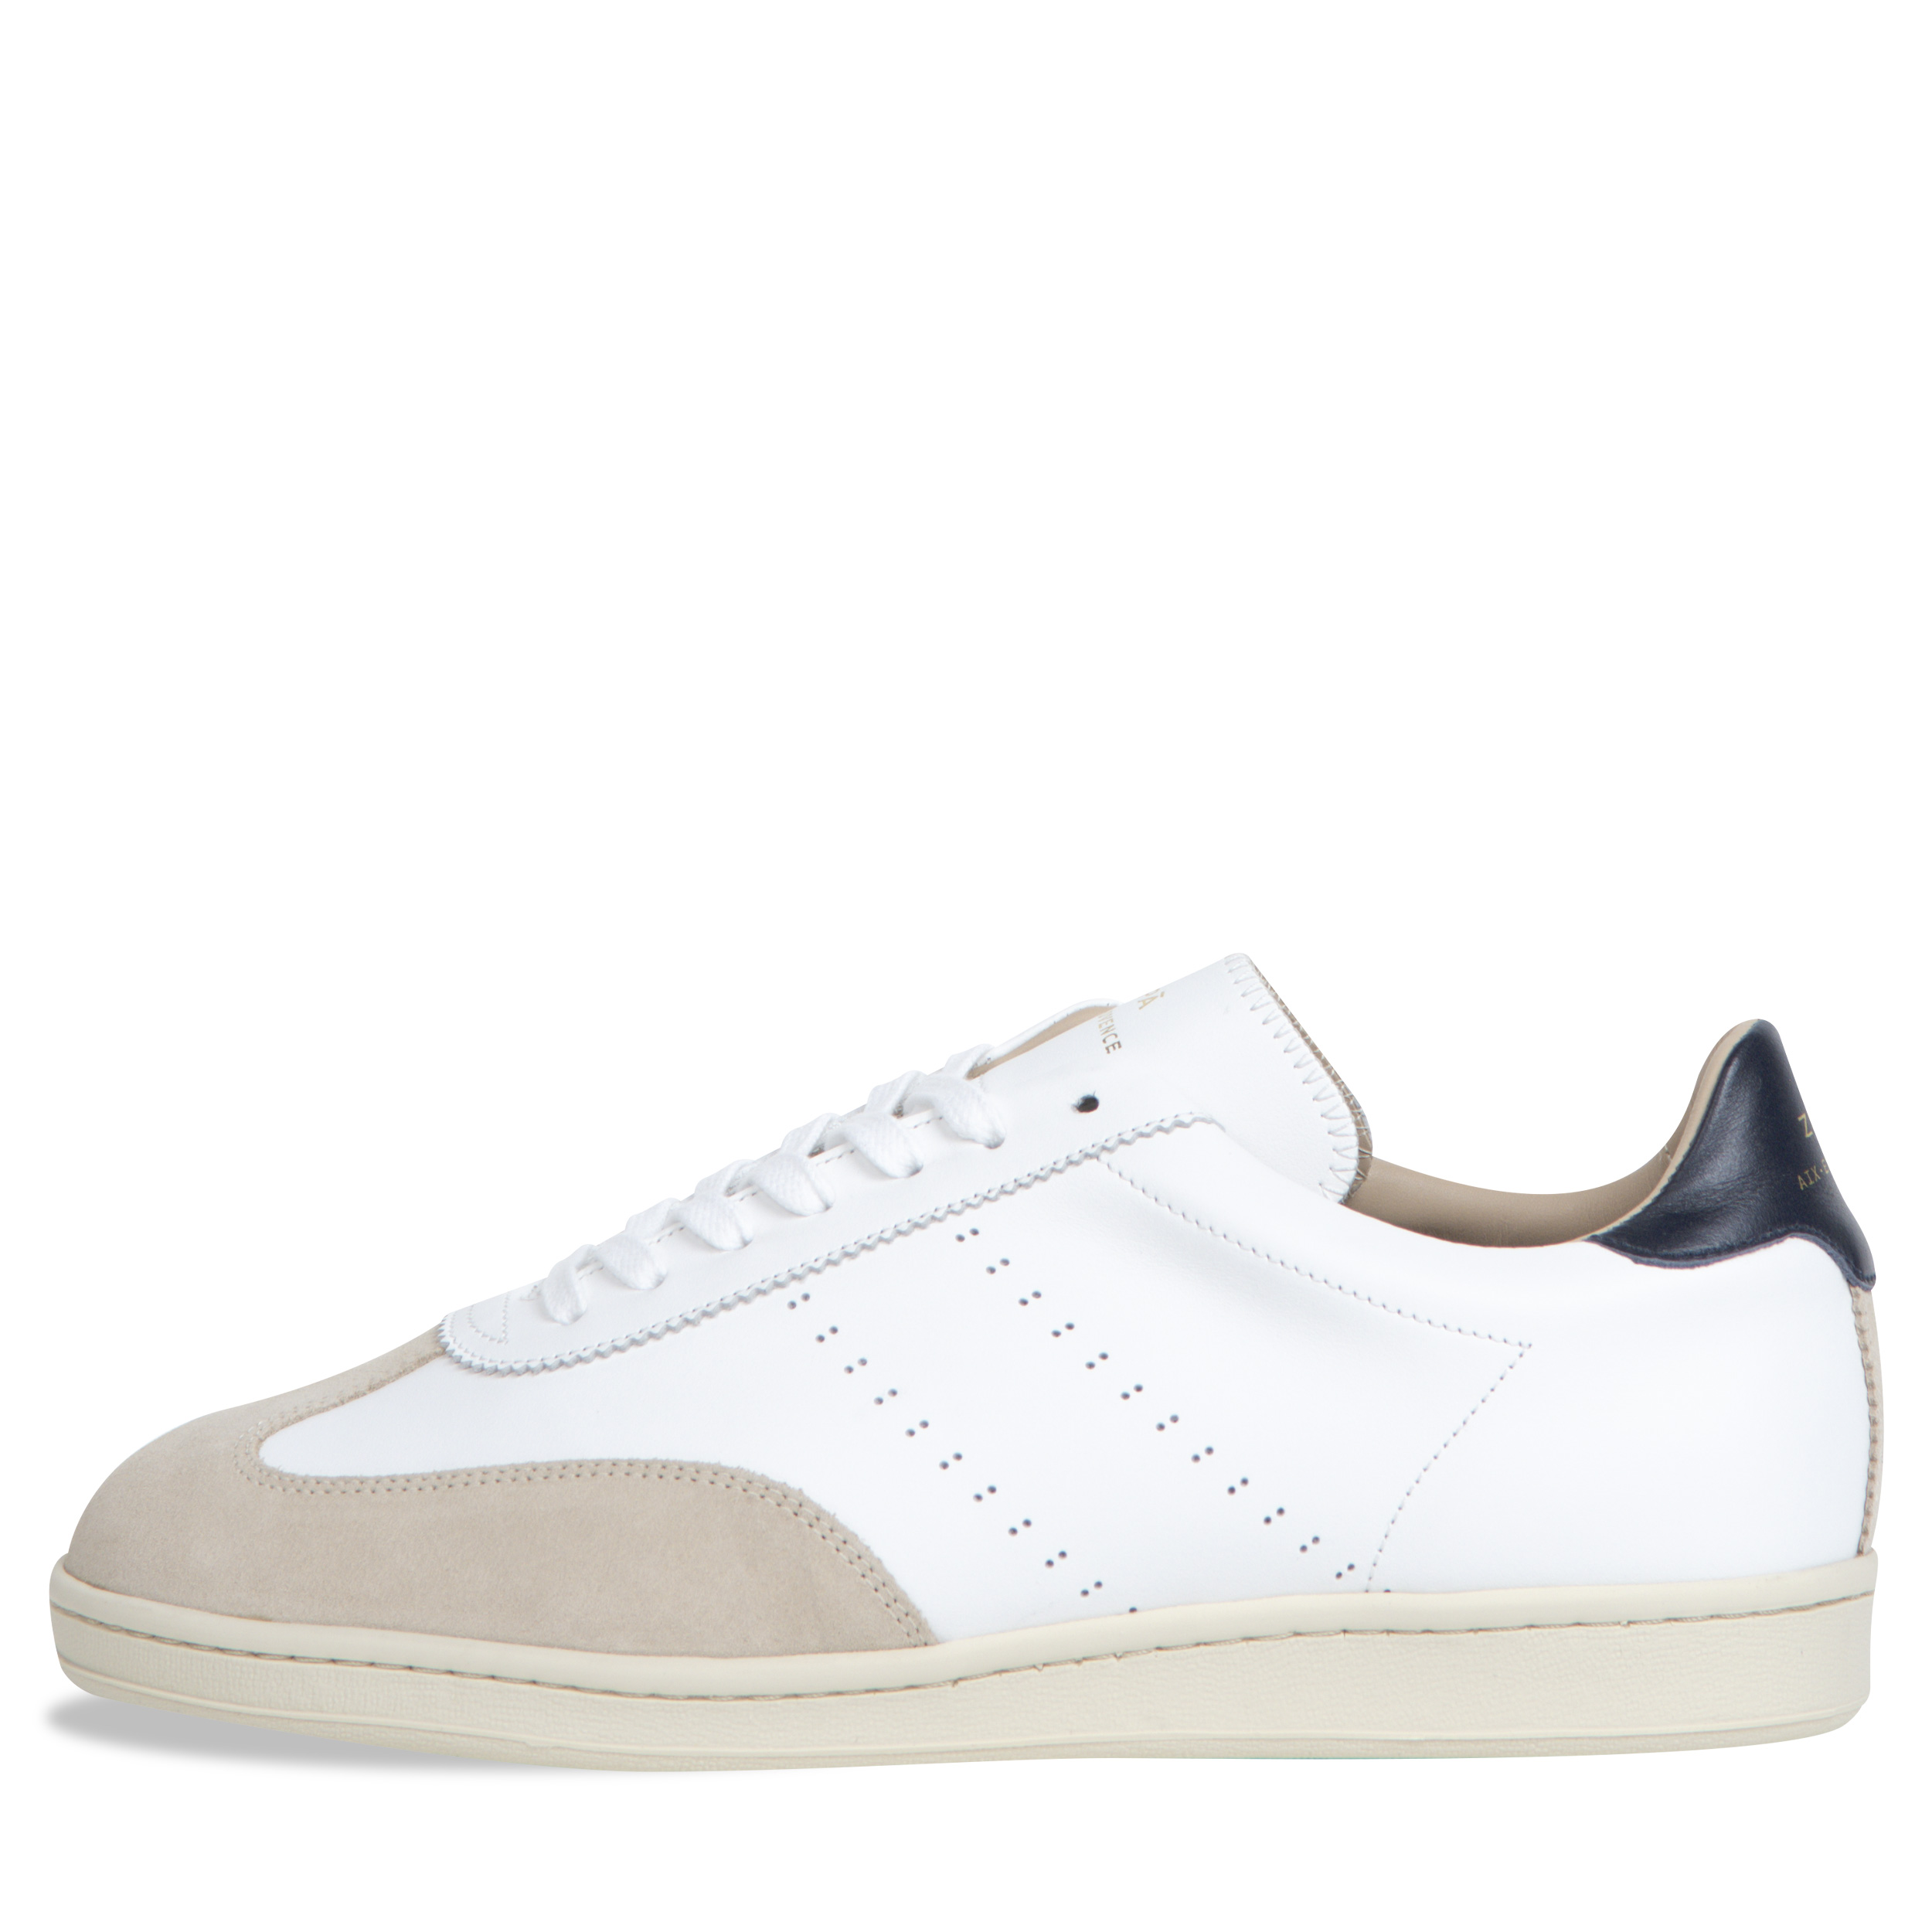 ZESPA ’ZSPGT’ Leather Sneaker White And Navy